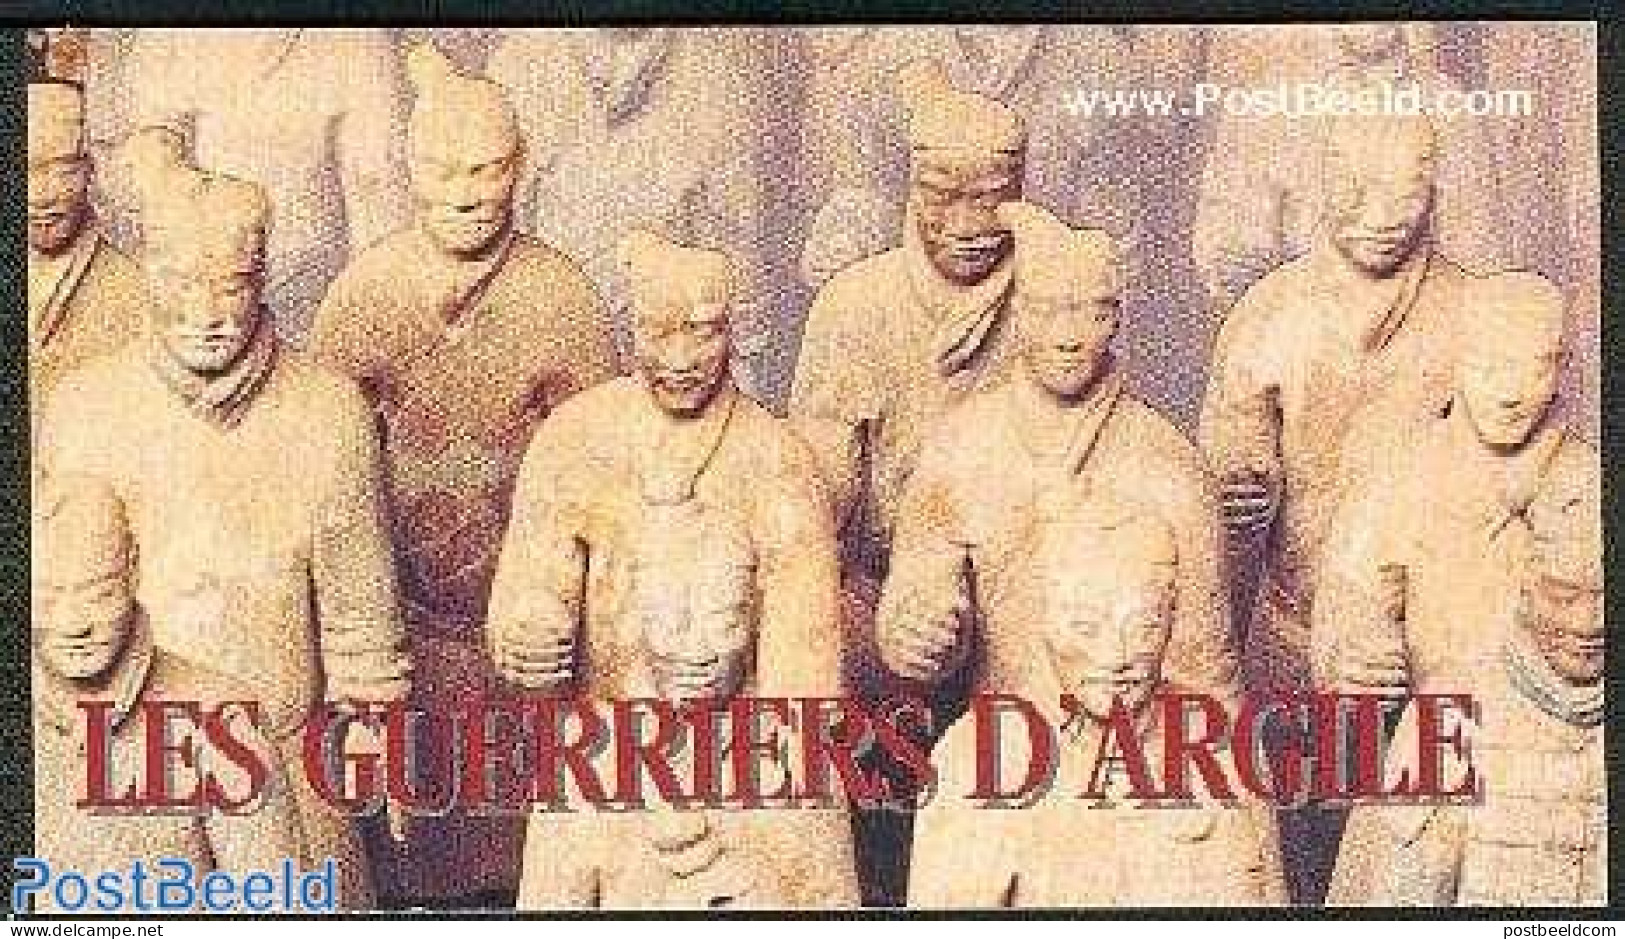 United Nations, Geneva 1997 Terracotta Army Prestige Booklet, Mint NH, History - World Heritage - Stamp Booklets - Art.. - Unclassified